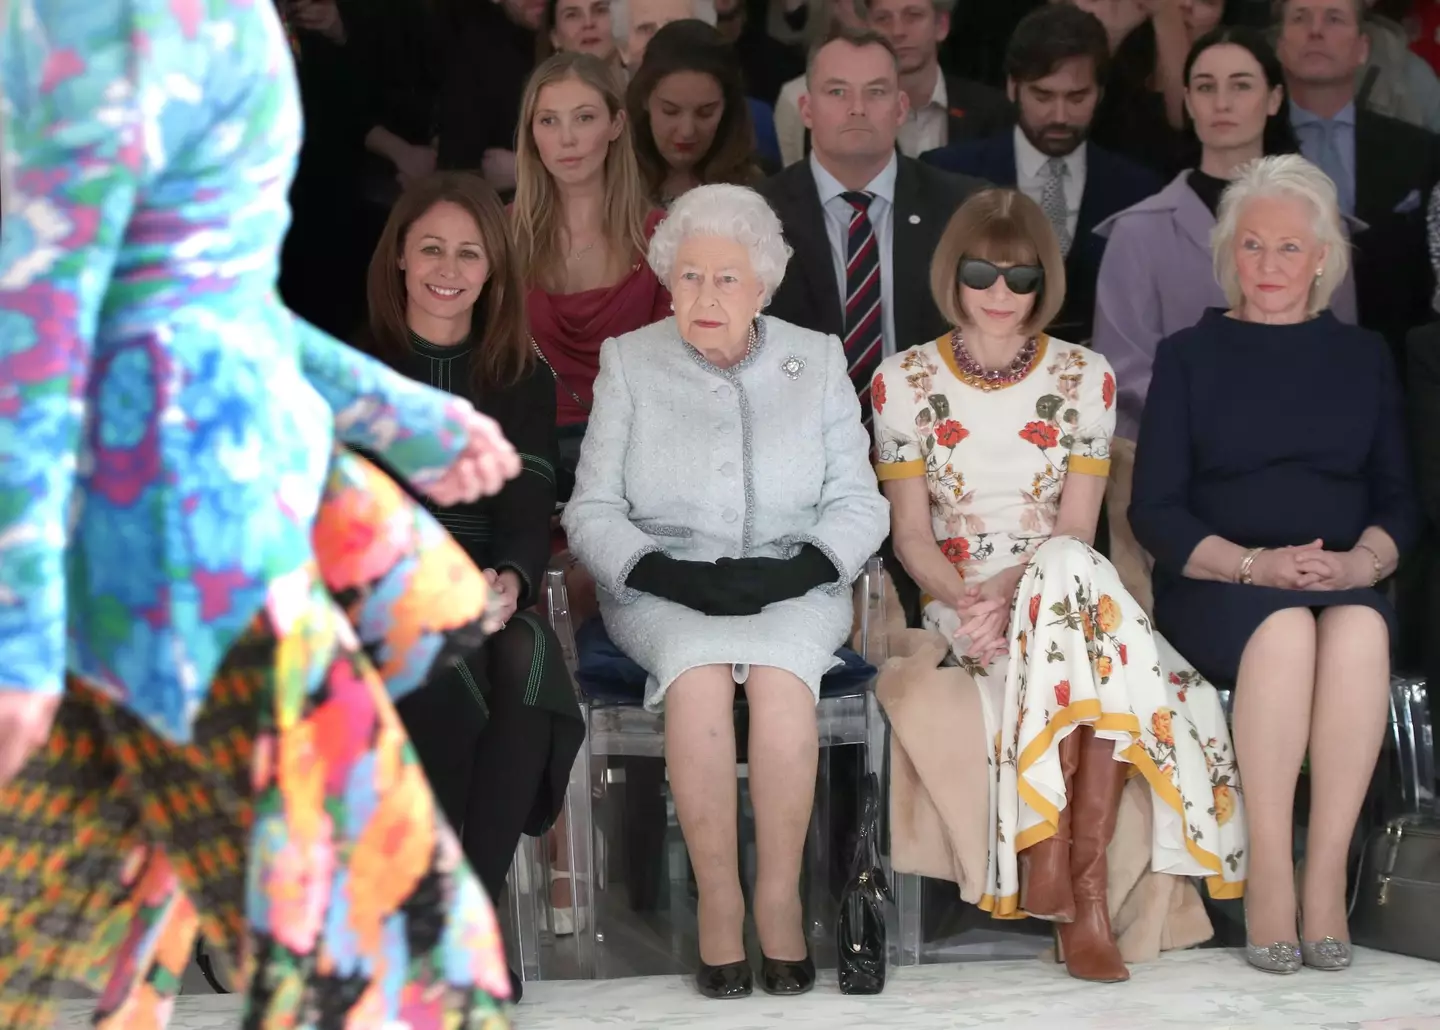 The Queen with Kelly on the right and Anna Wintour sat between them.